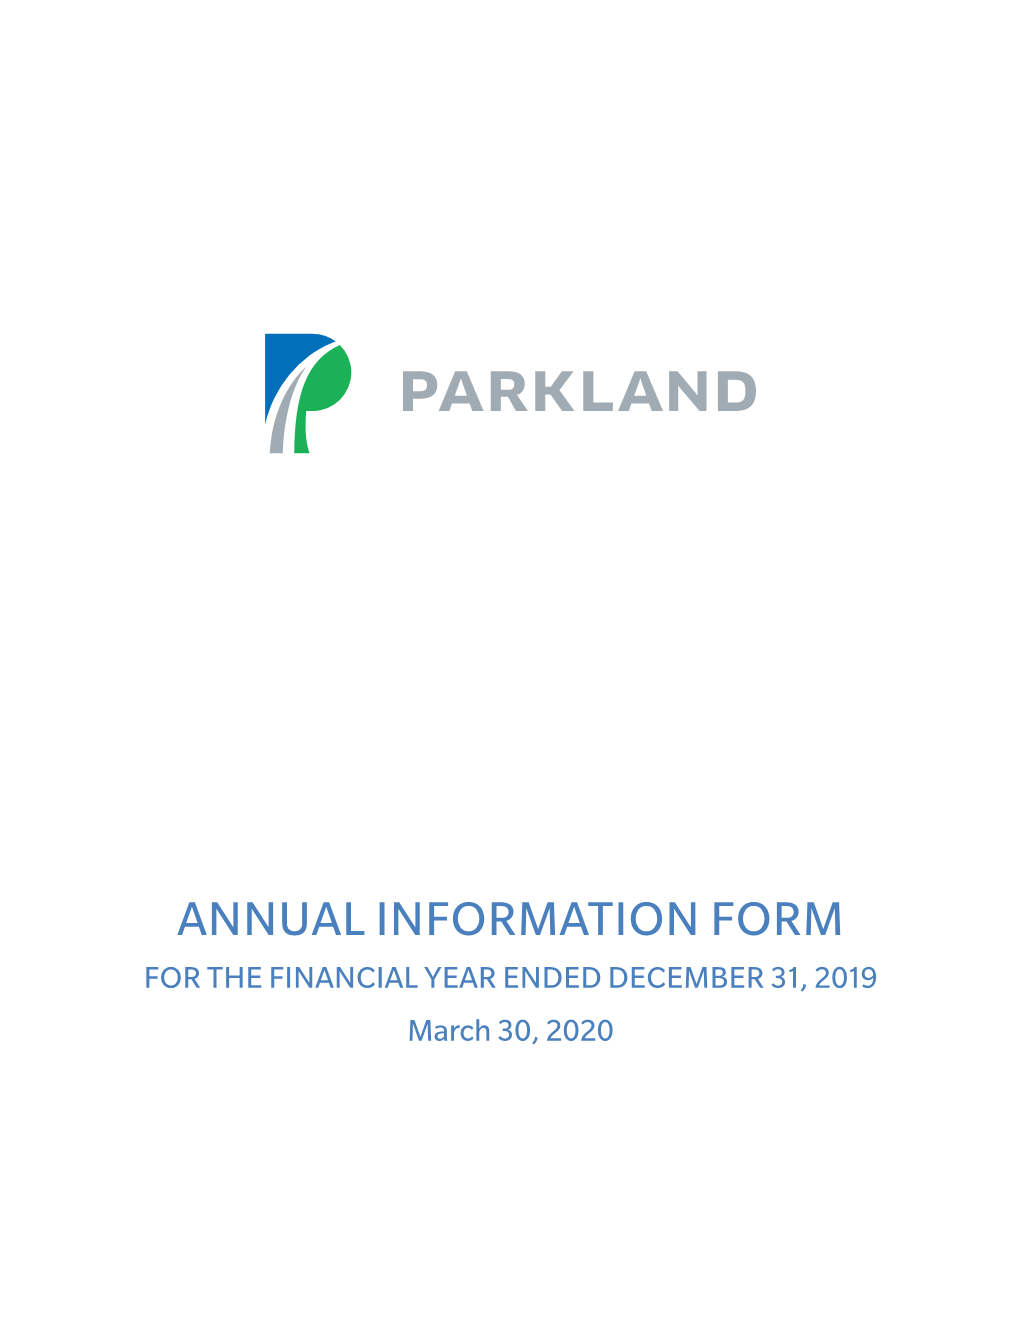 ANNUAL INFORMATION FORM for the FINANCIAL YEAR ENDED DECEMBER 31, 2019 March 30, 2020 TABLE of CONTENTS GLOSSARY of TERMS